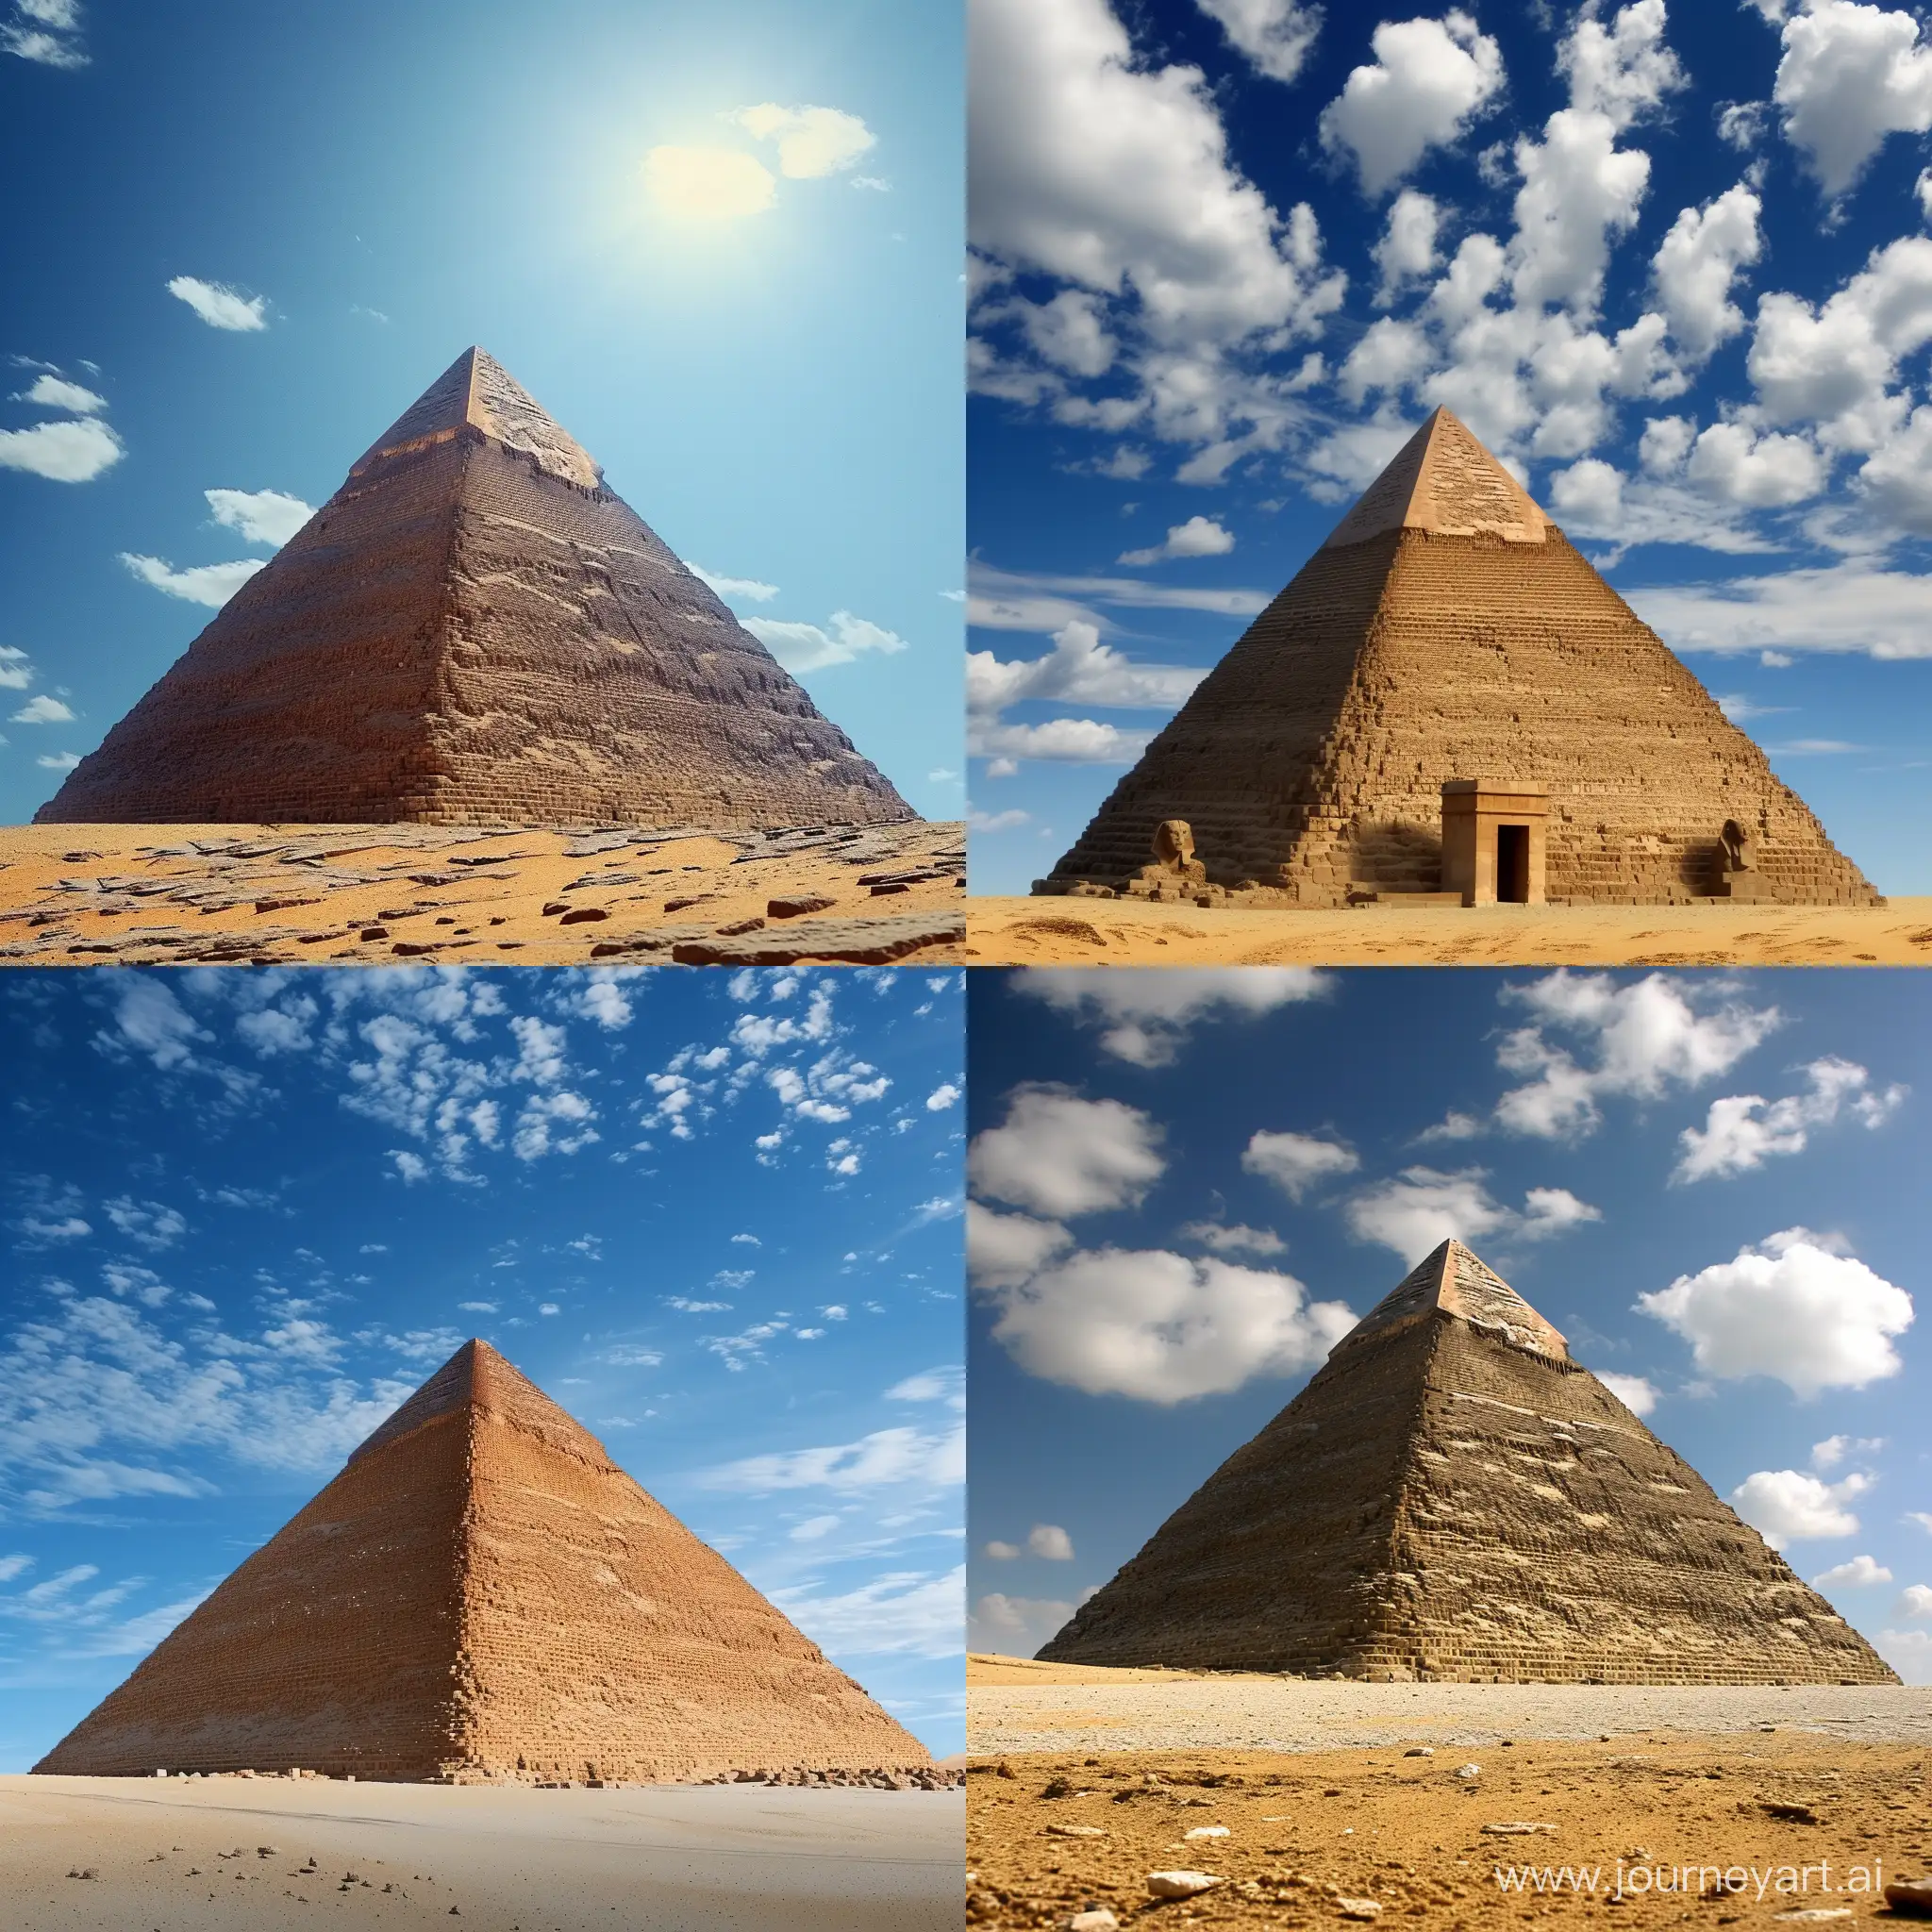 hyper real image of an egyptian pyramid sitting under the blue sky.